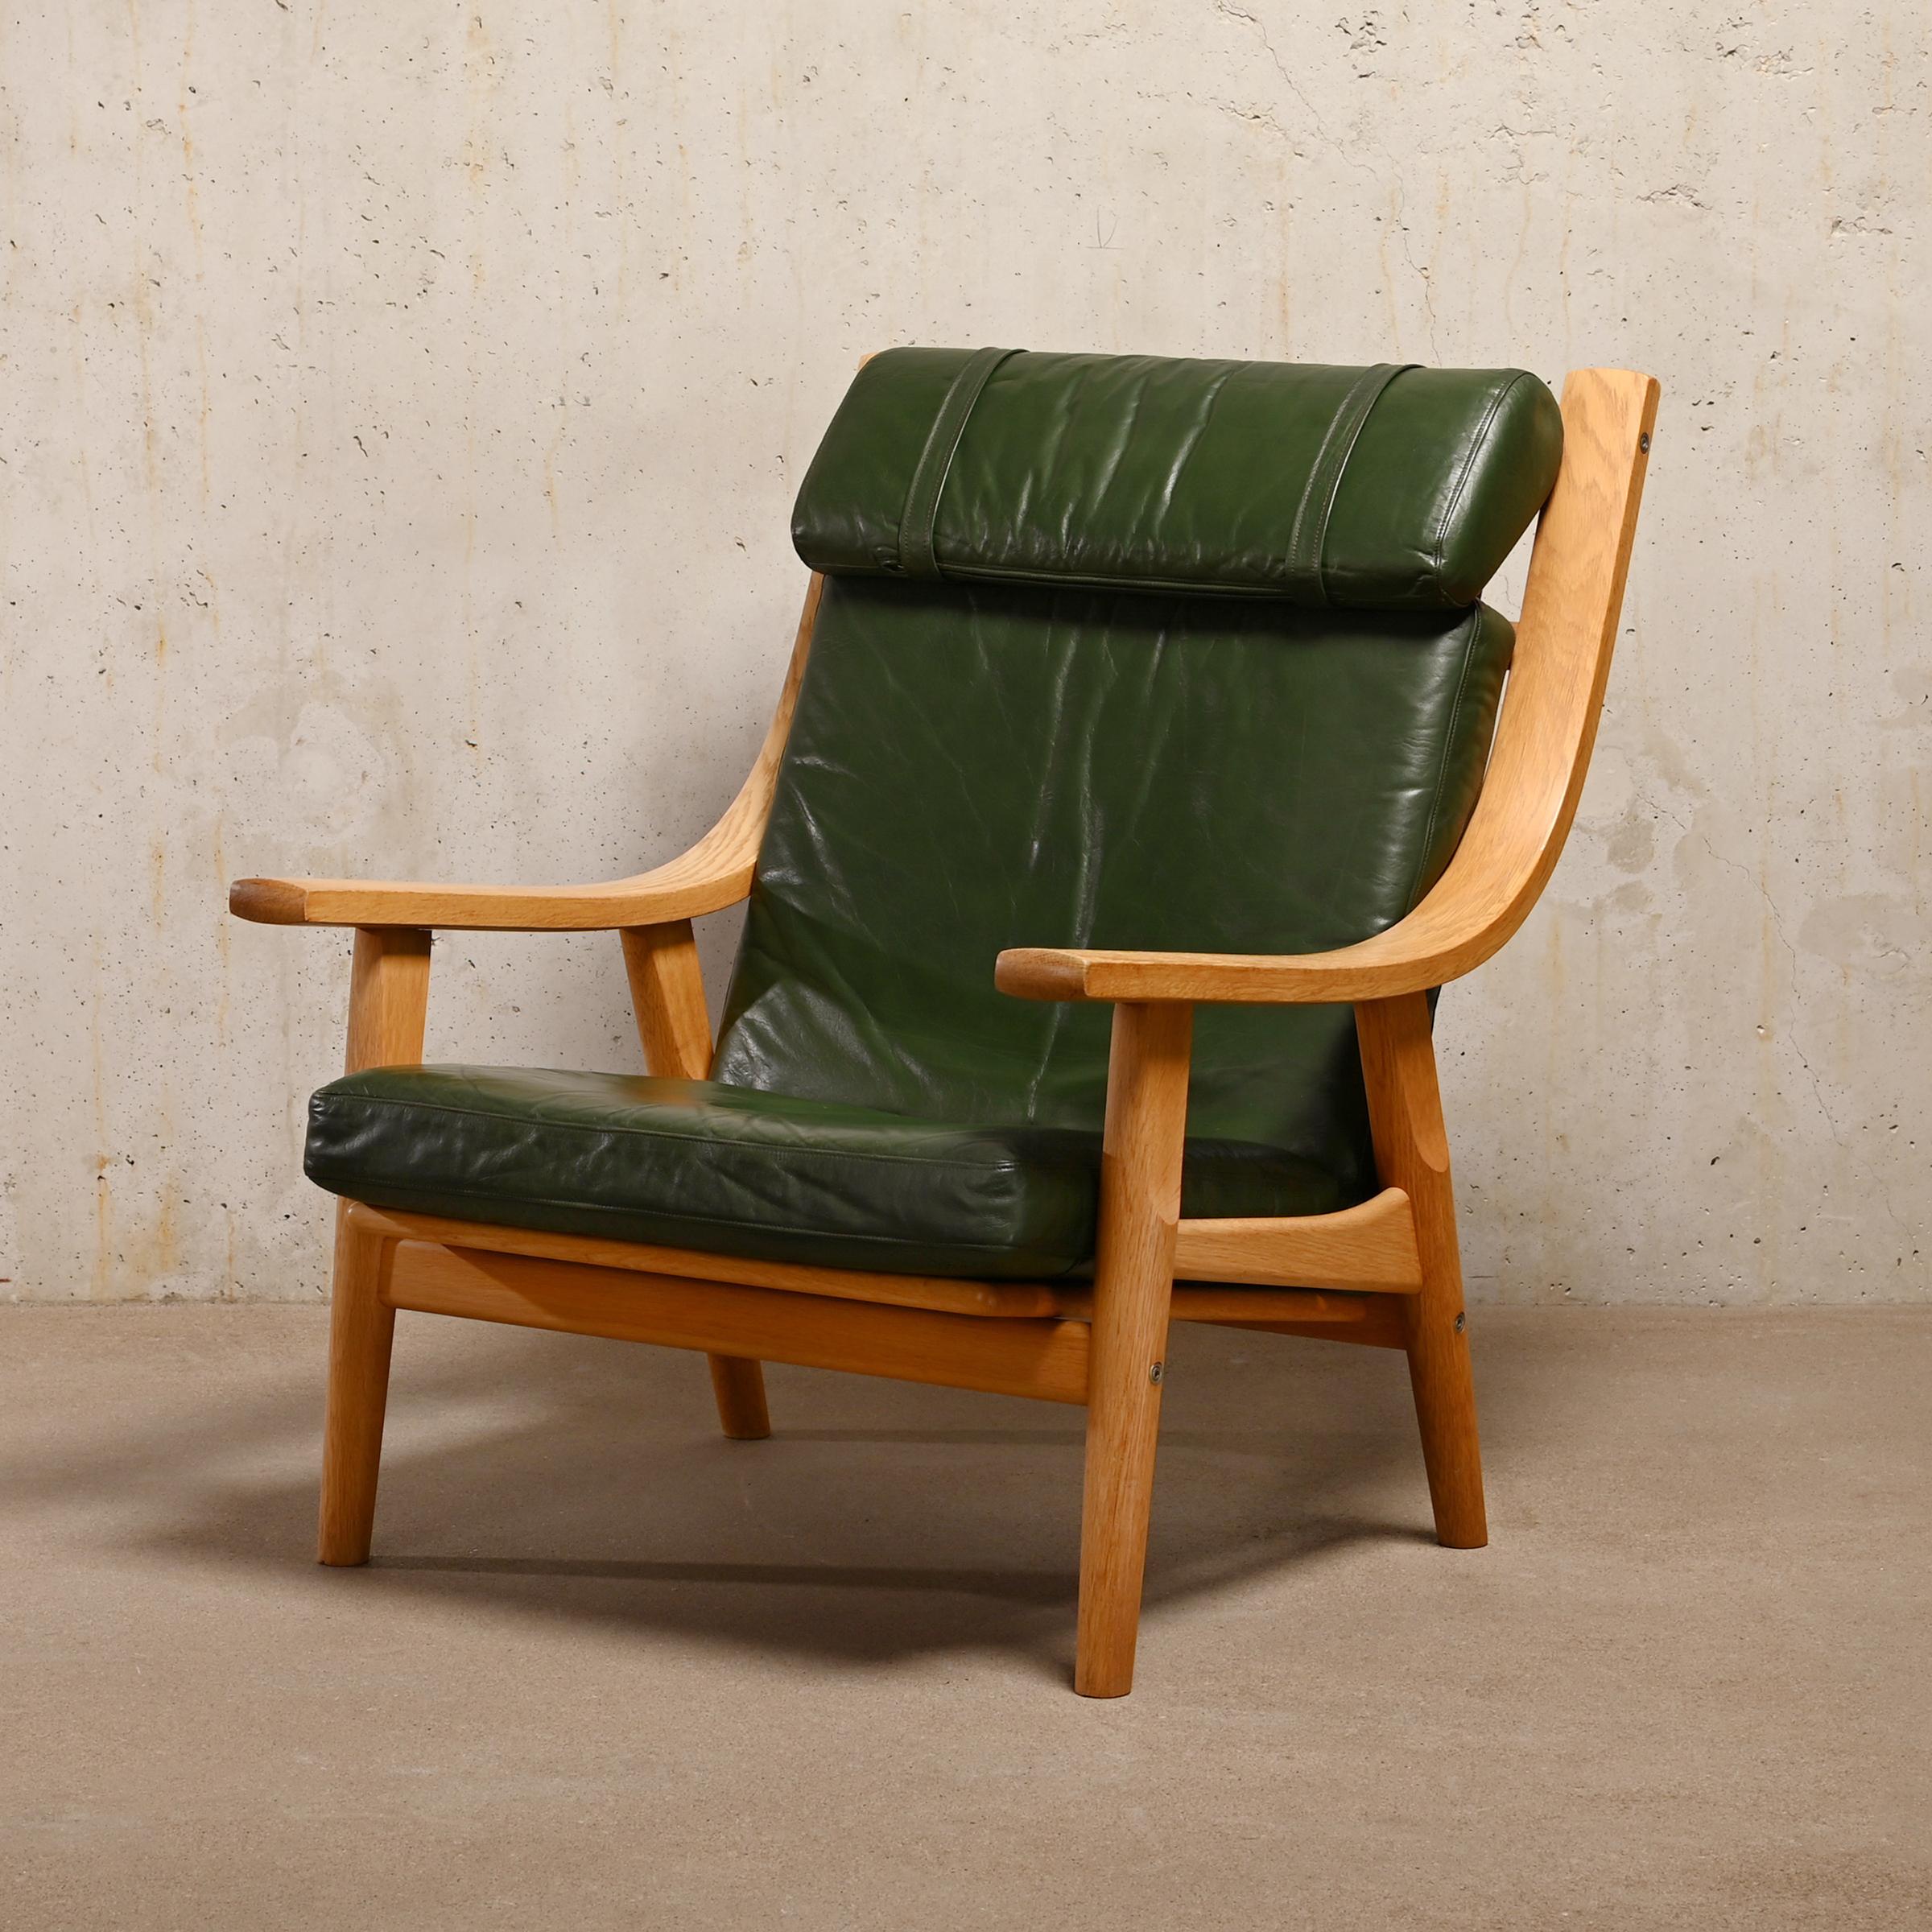 Great example of Hans J. Wegner GE-530 lounge chair and matching Ottoman for GETAMA, Denmark. Hight quality solid Oak frame with original forrest green leather cushions supported by rubber straps. Both chair and ottoman are signed with manufacture